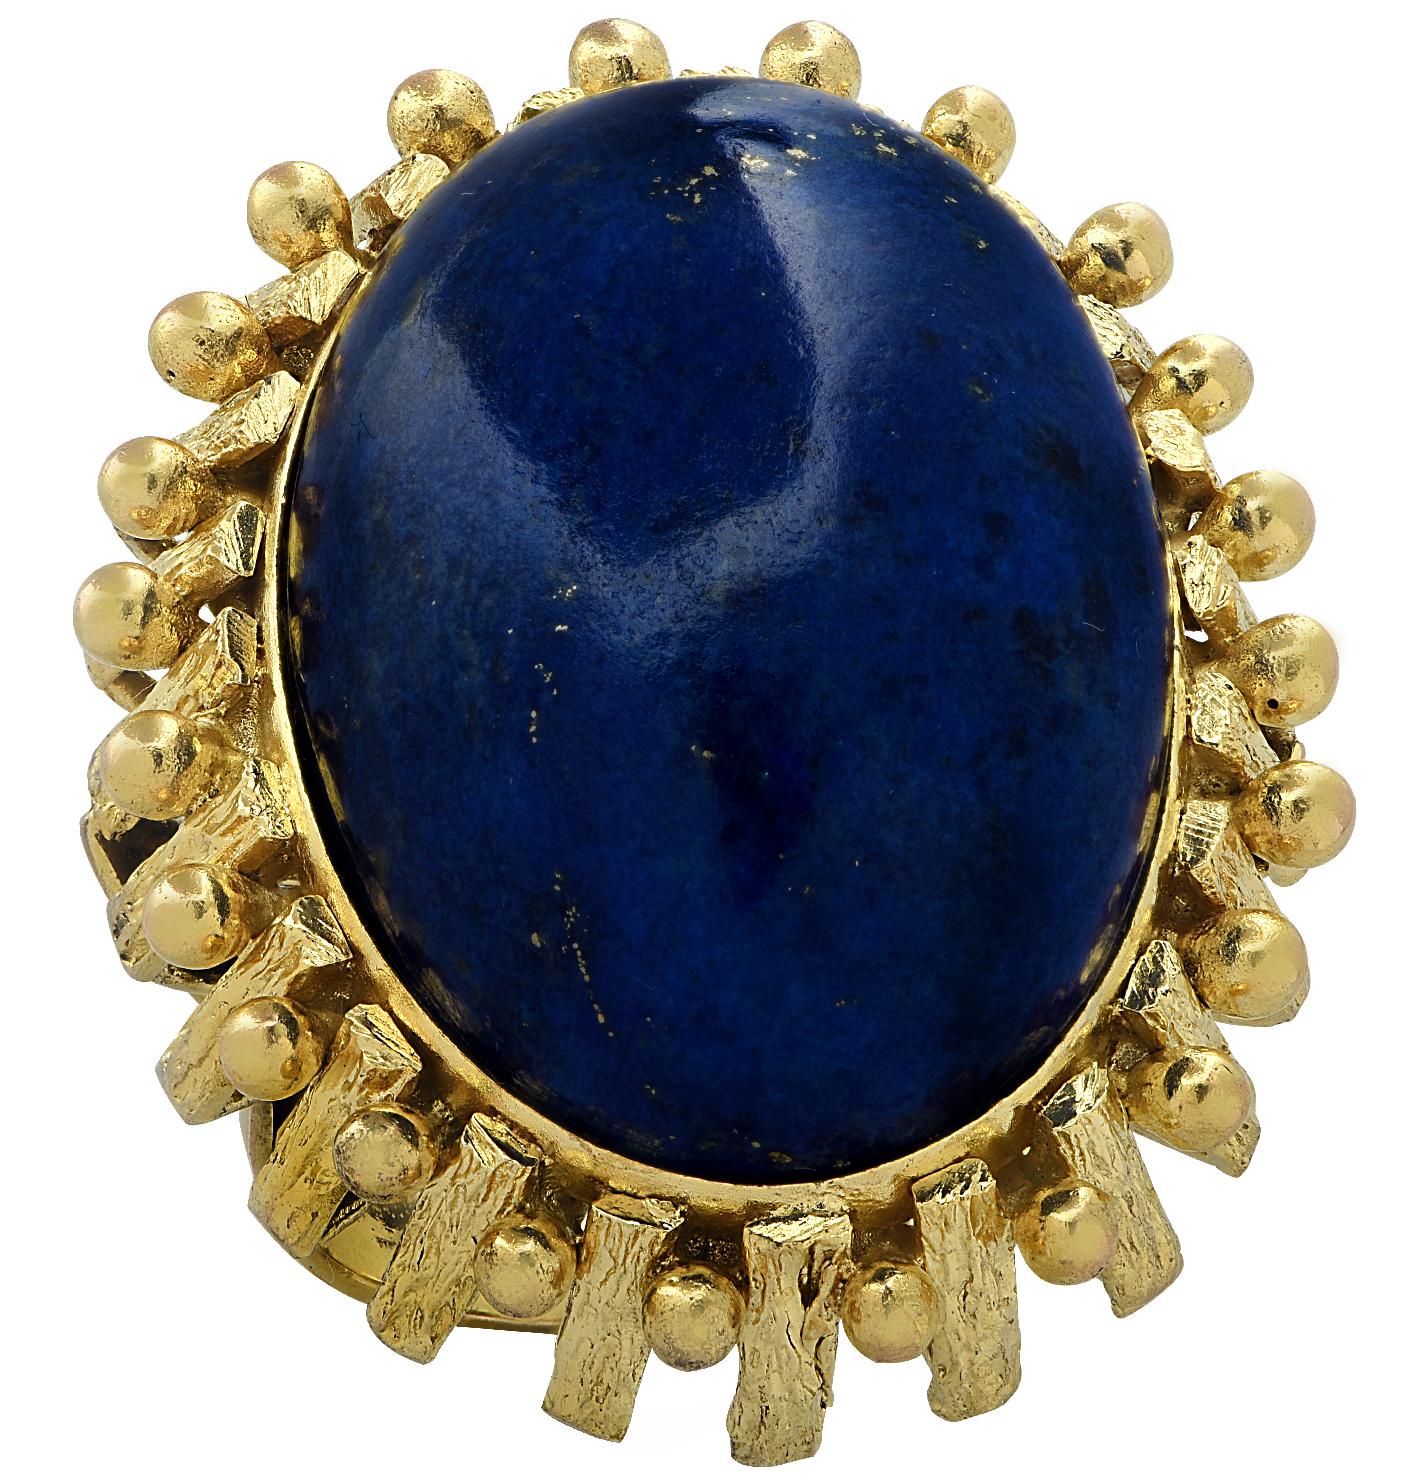 Striking cocktail ring crafted in yellow gold, showcasing an impressive oval Lapis Lazuli cabochon measuring 25mm x 17.8mm. The face of this majestic ring measures 1.2 inches in length and 1 inch in width. The shank measures 4.27 mm tapering gently